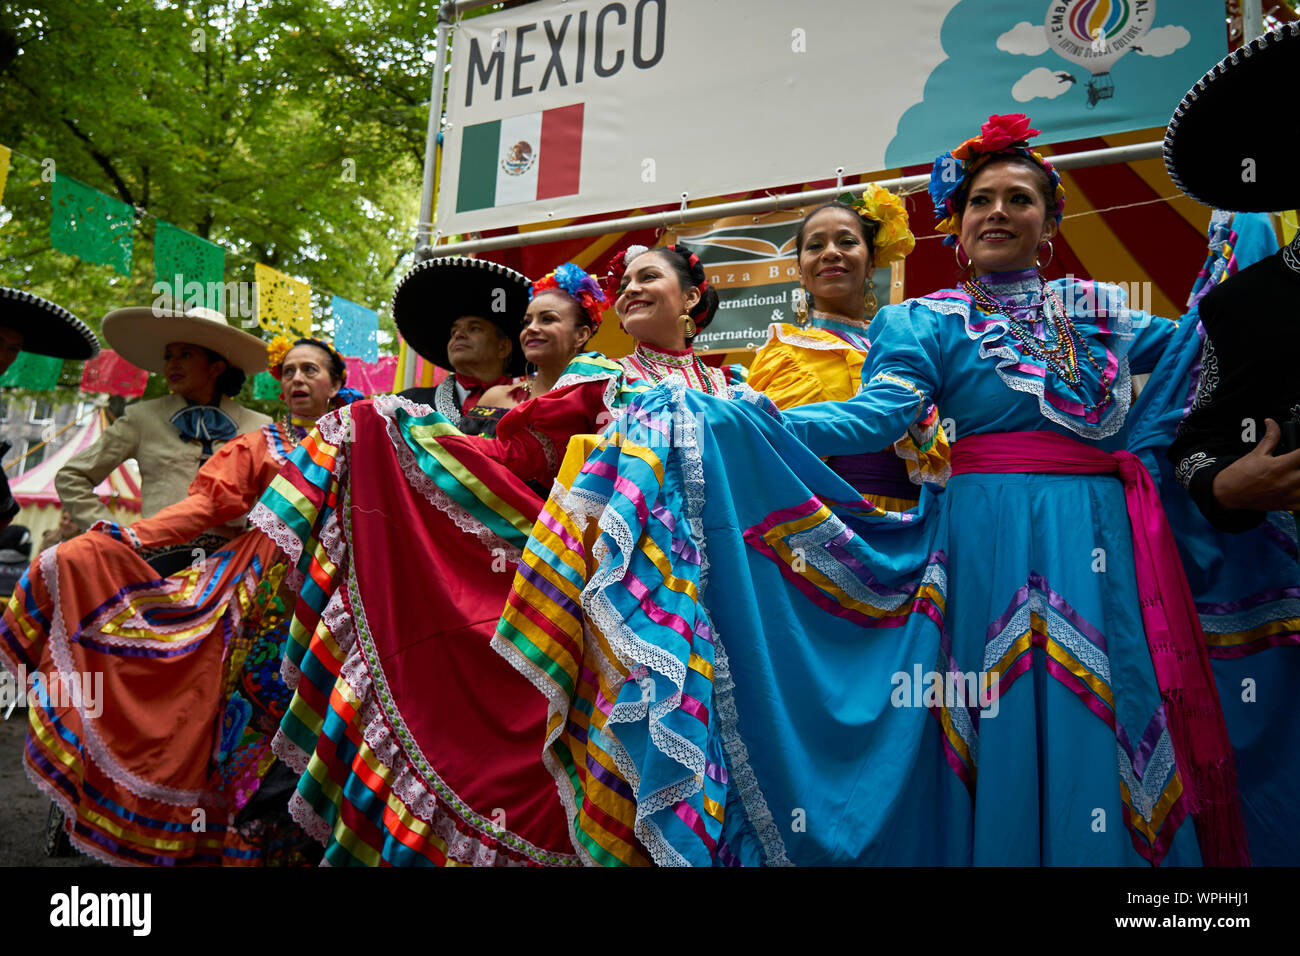 A group of Mexicans pose in the typical costume in front of the Mexican stand. Stock Photo